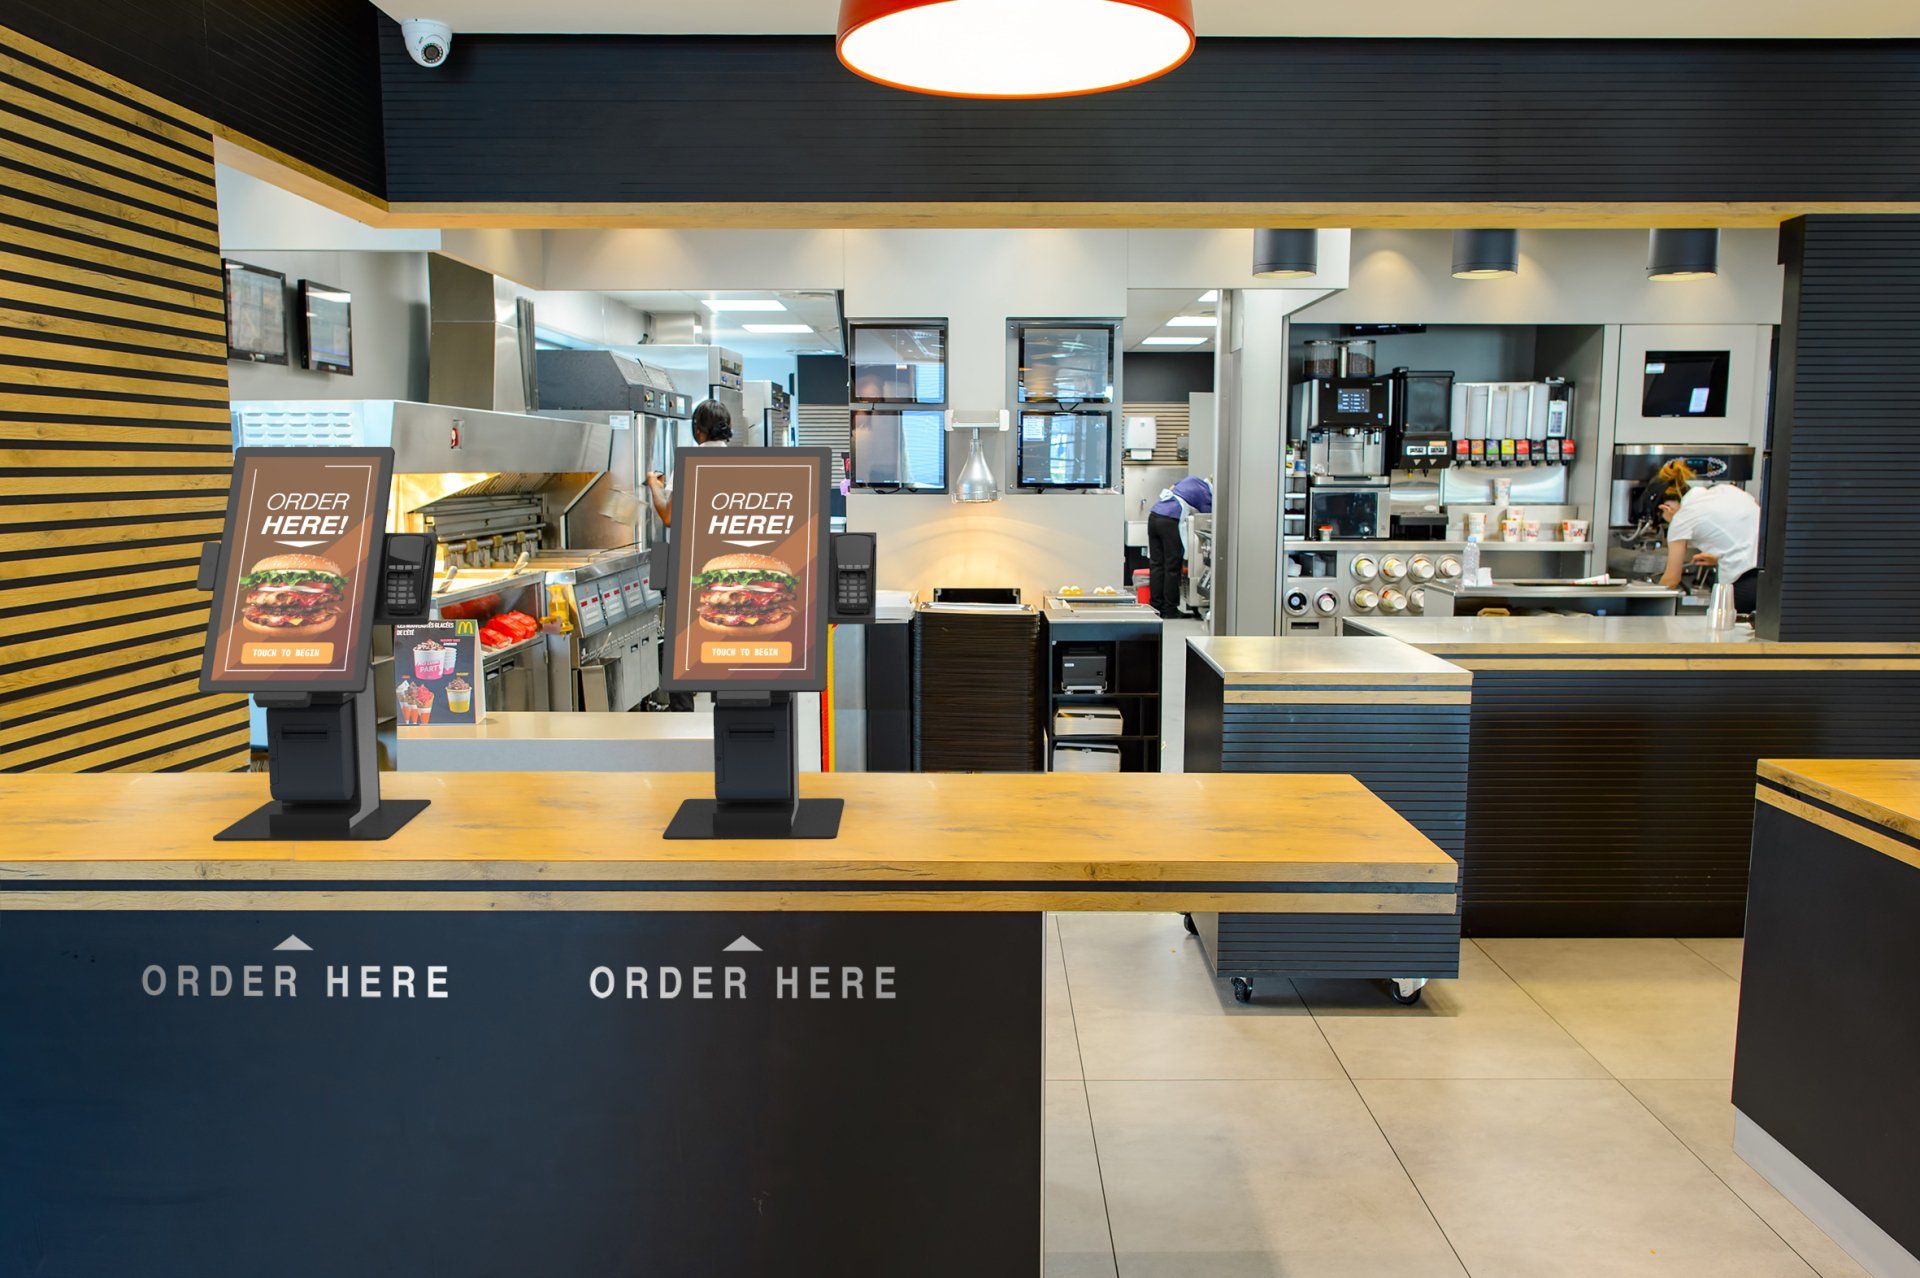 self-service kiosks for self ordering in a fast food restaurant